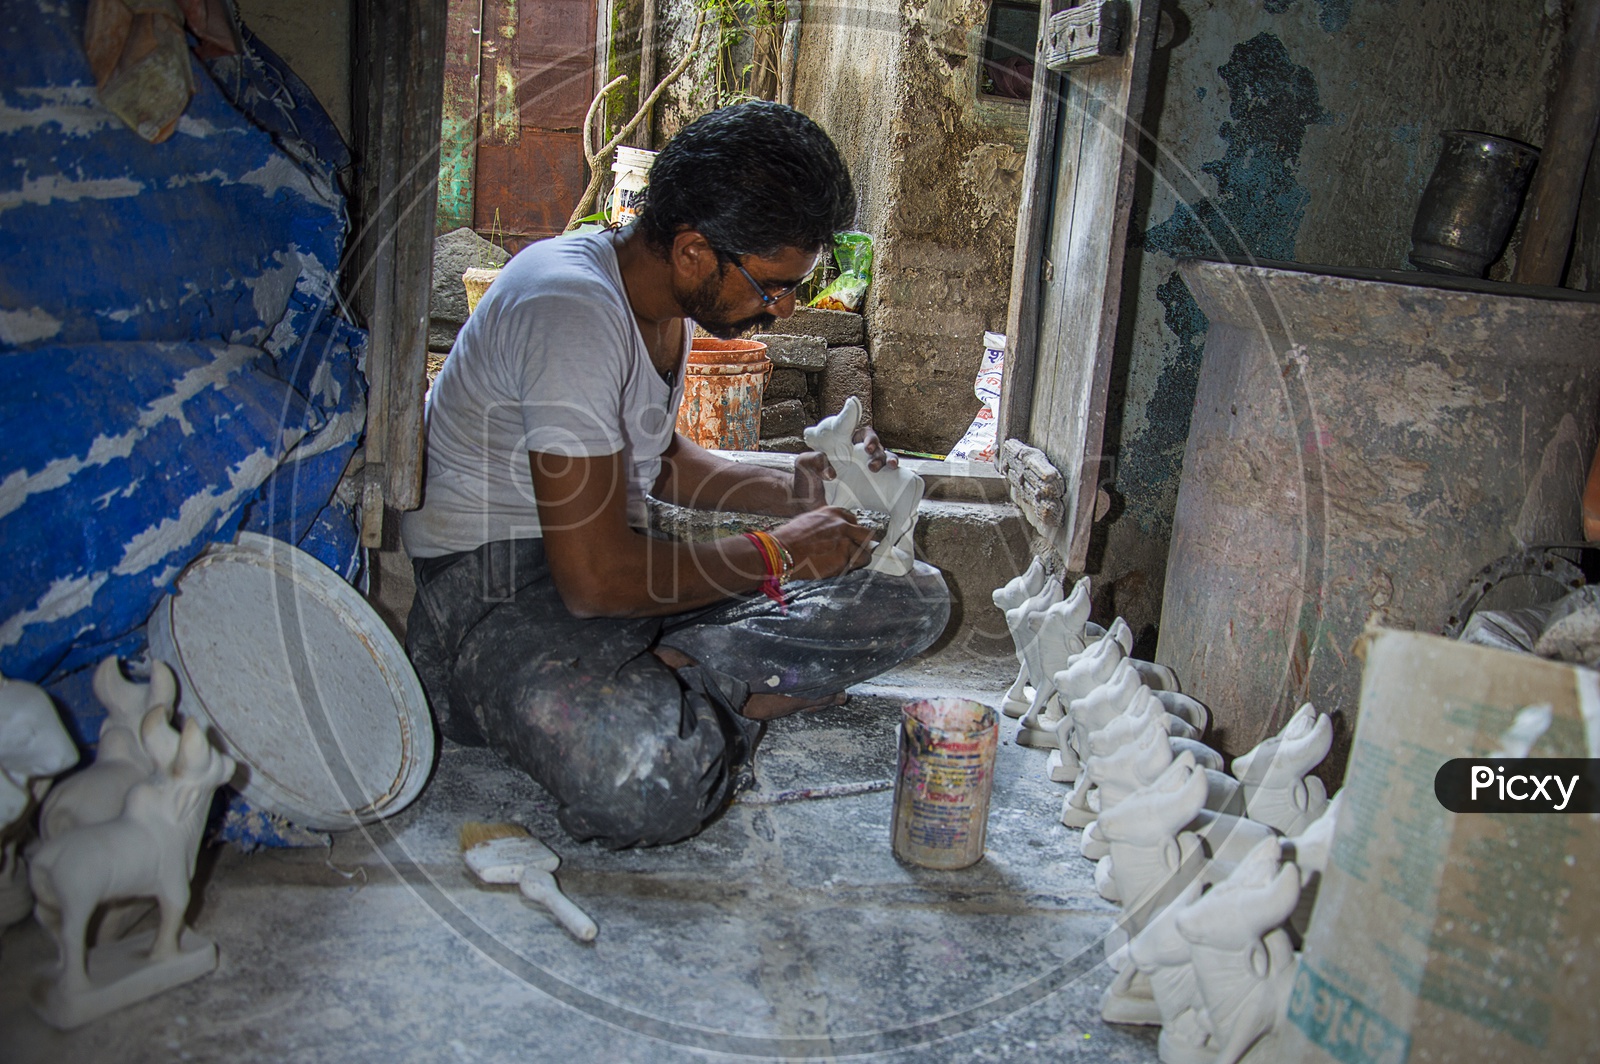 Artists Making Indian Holy Cow Idols In Workshops For Ganesh Festival